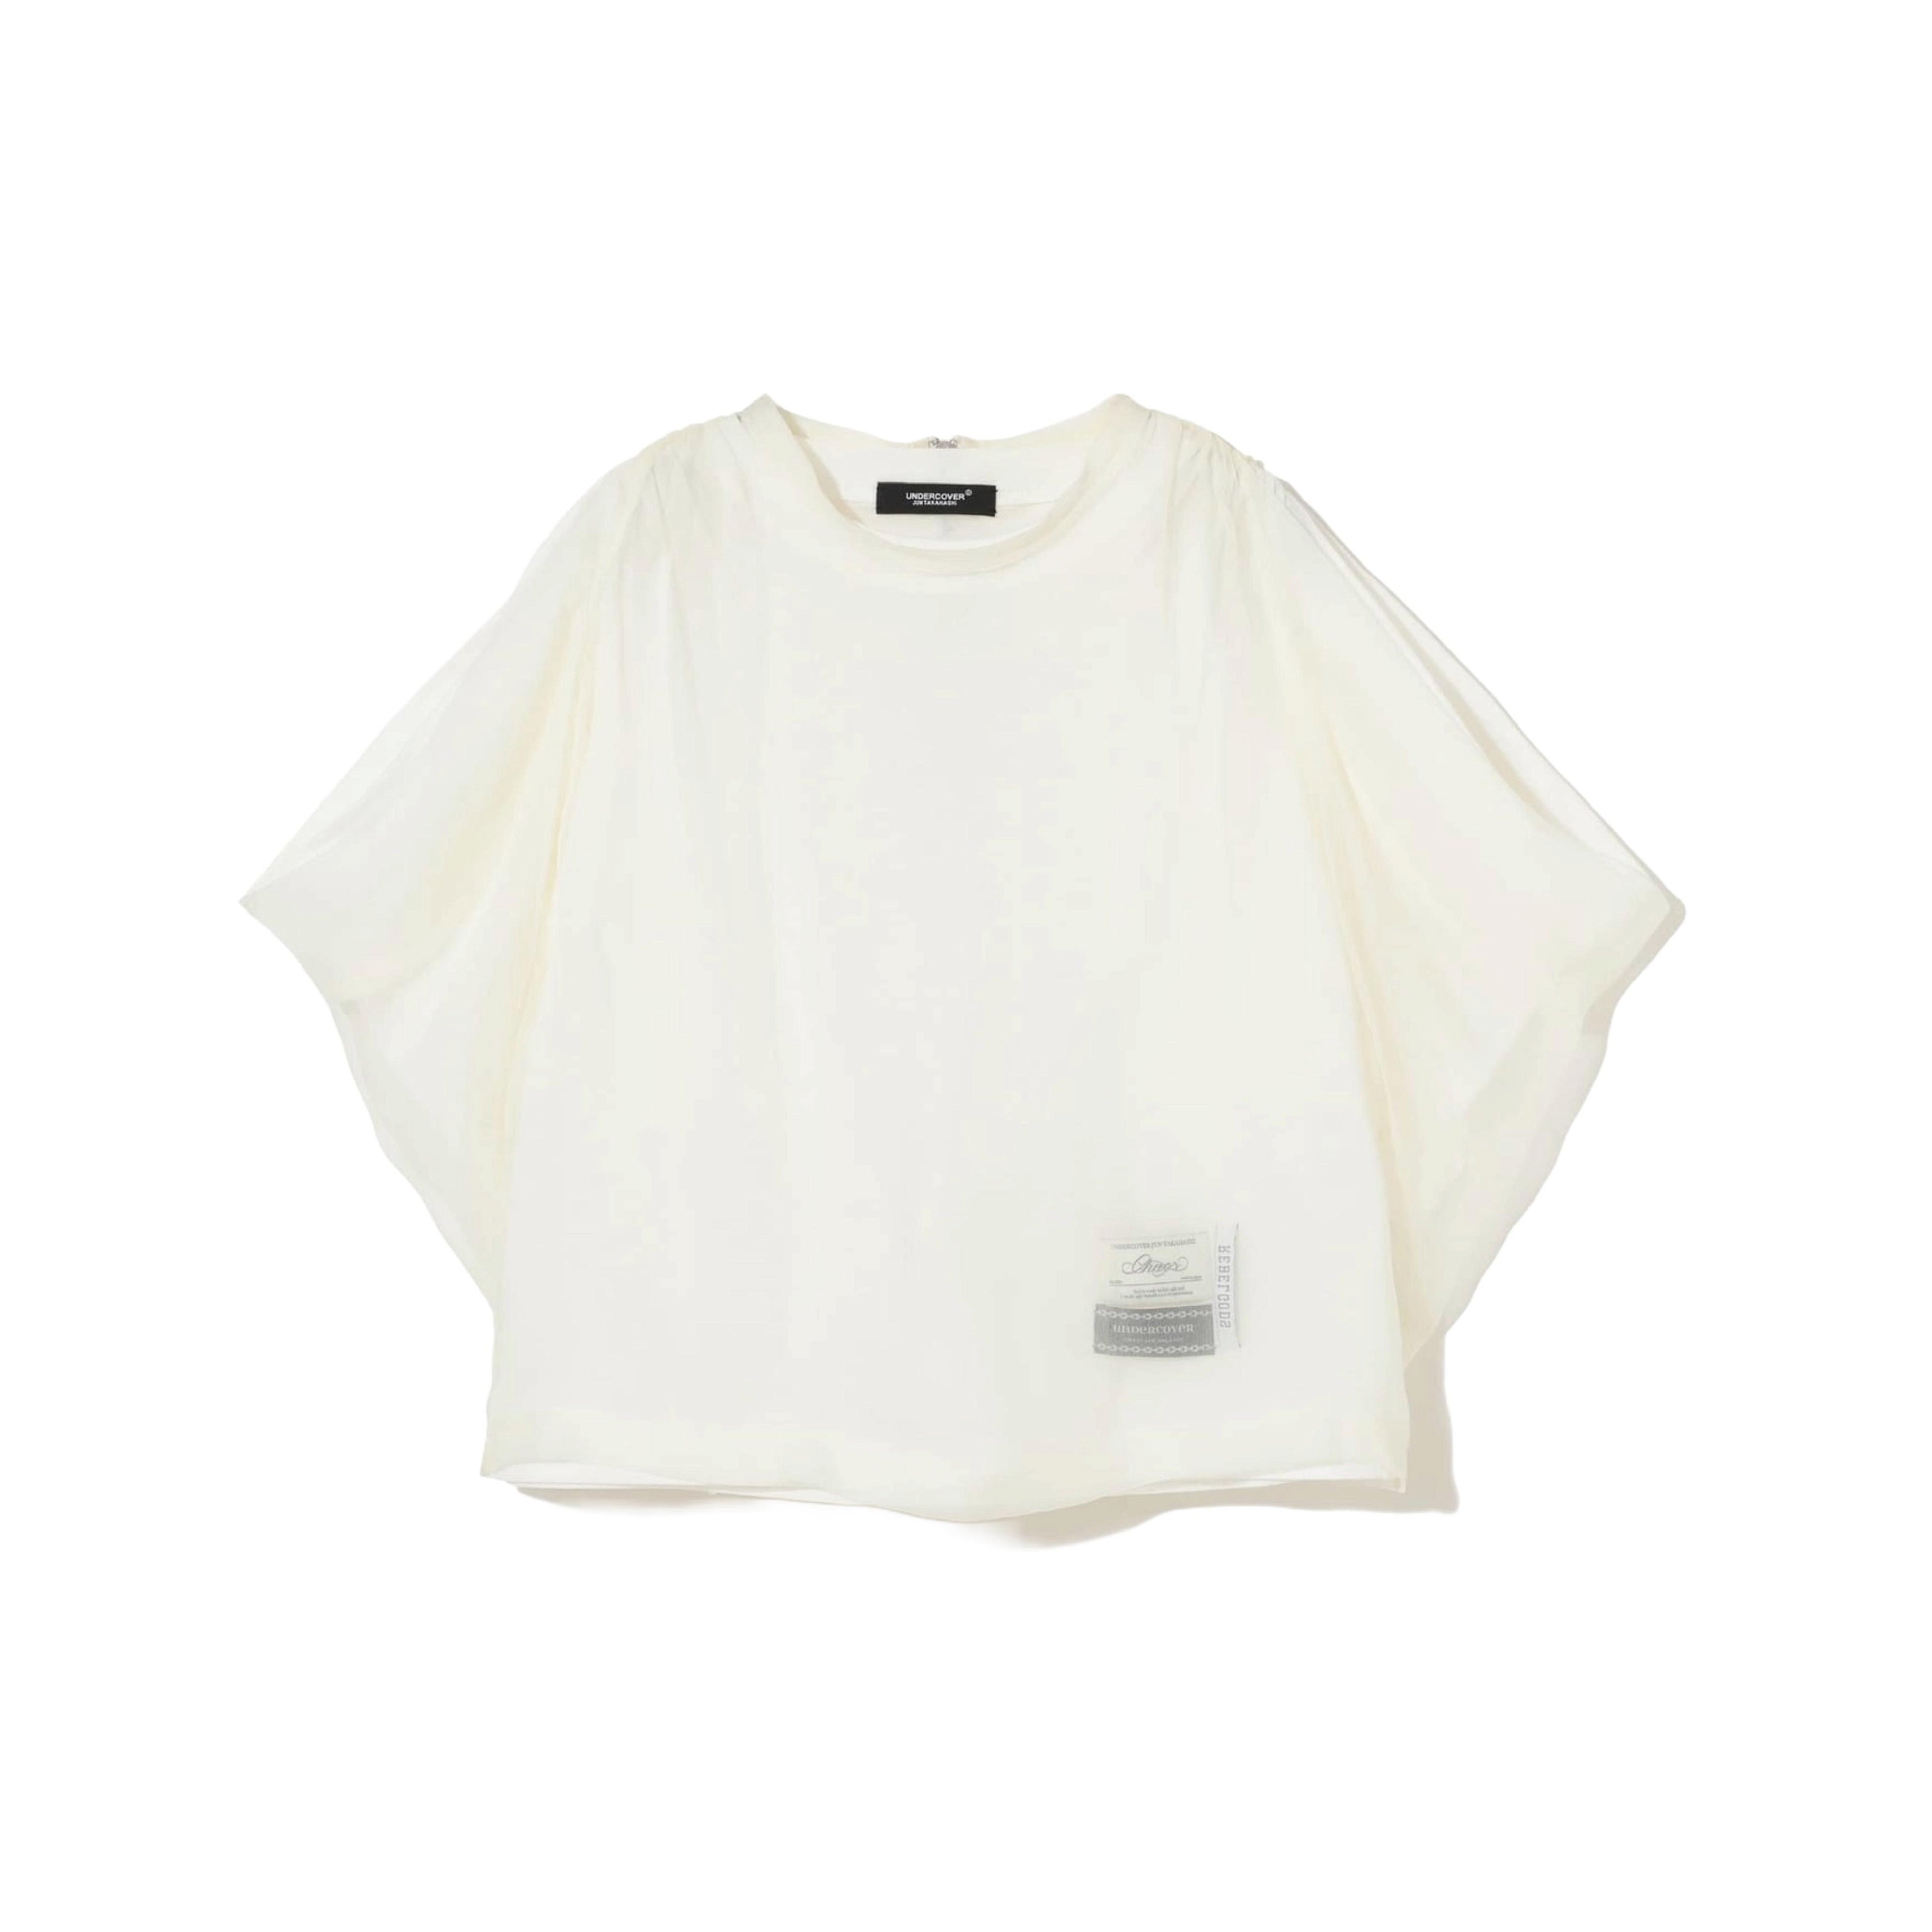 UNDERCOVER - Women's Jersey - (White) by UNDERCOVER